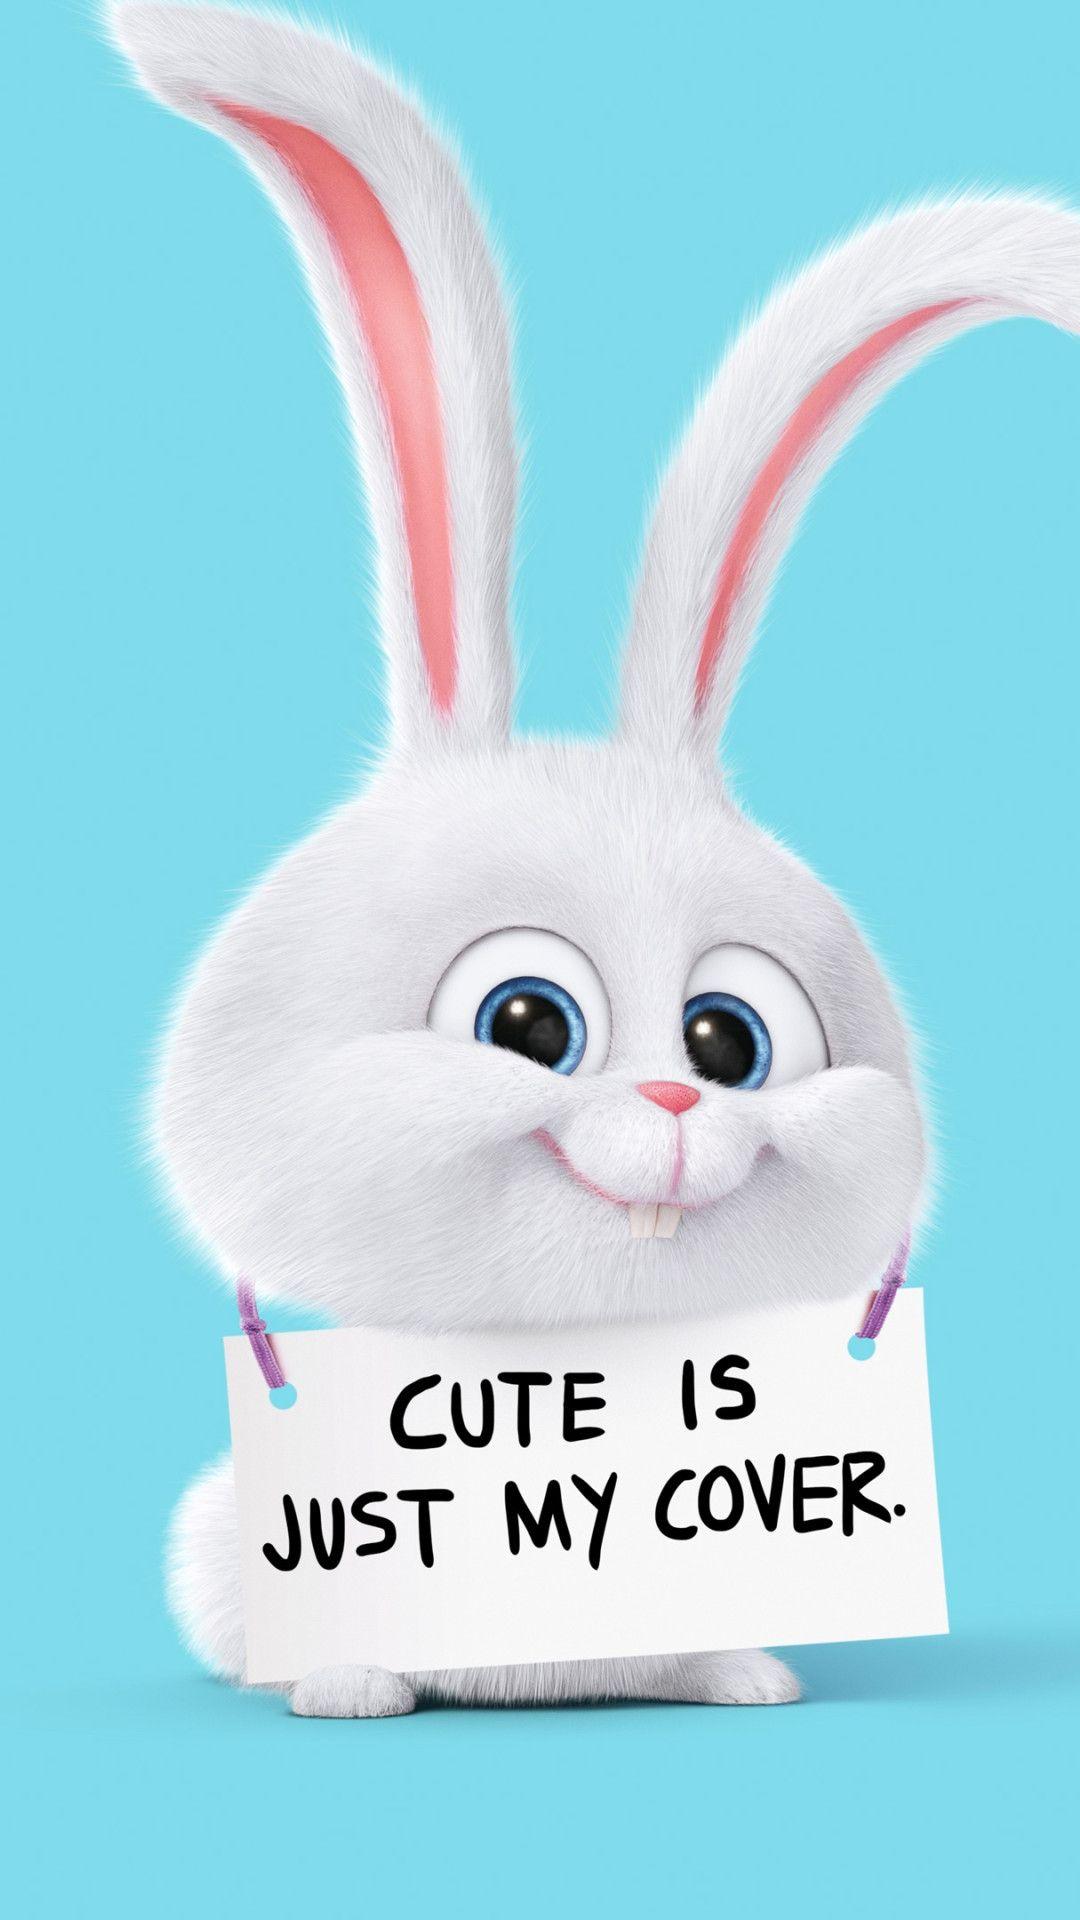 Cute Is Just My Cover Rabbit Android Wallpaper free download